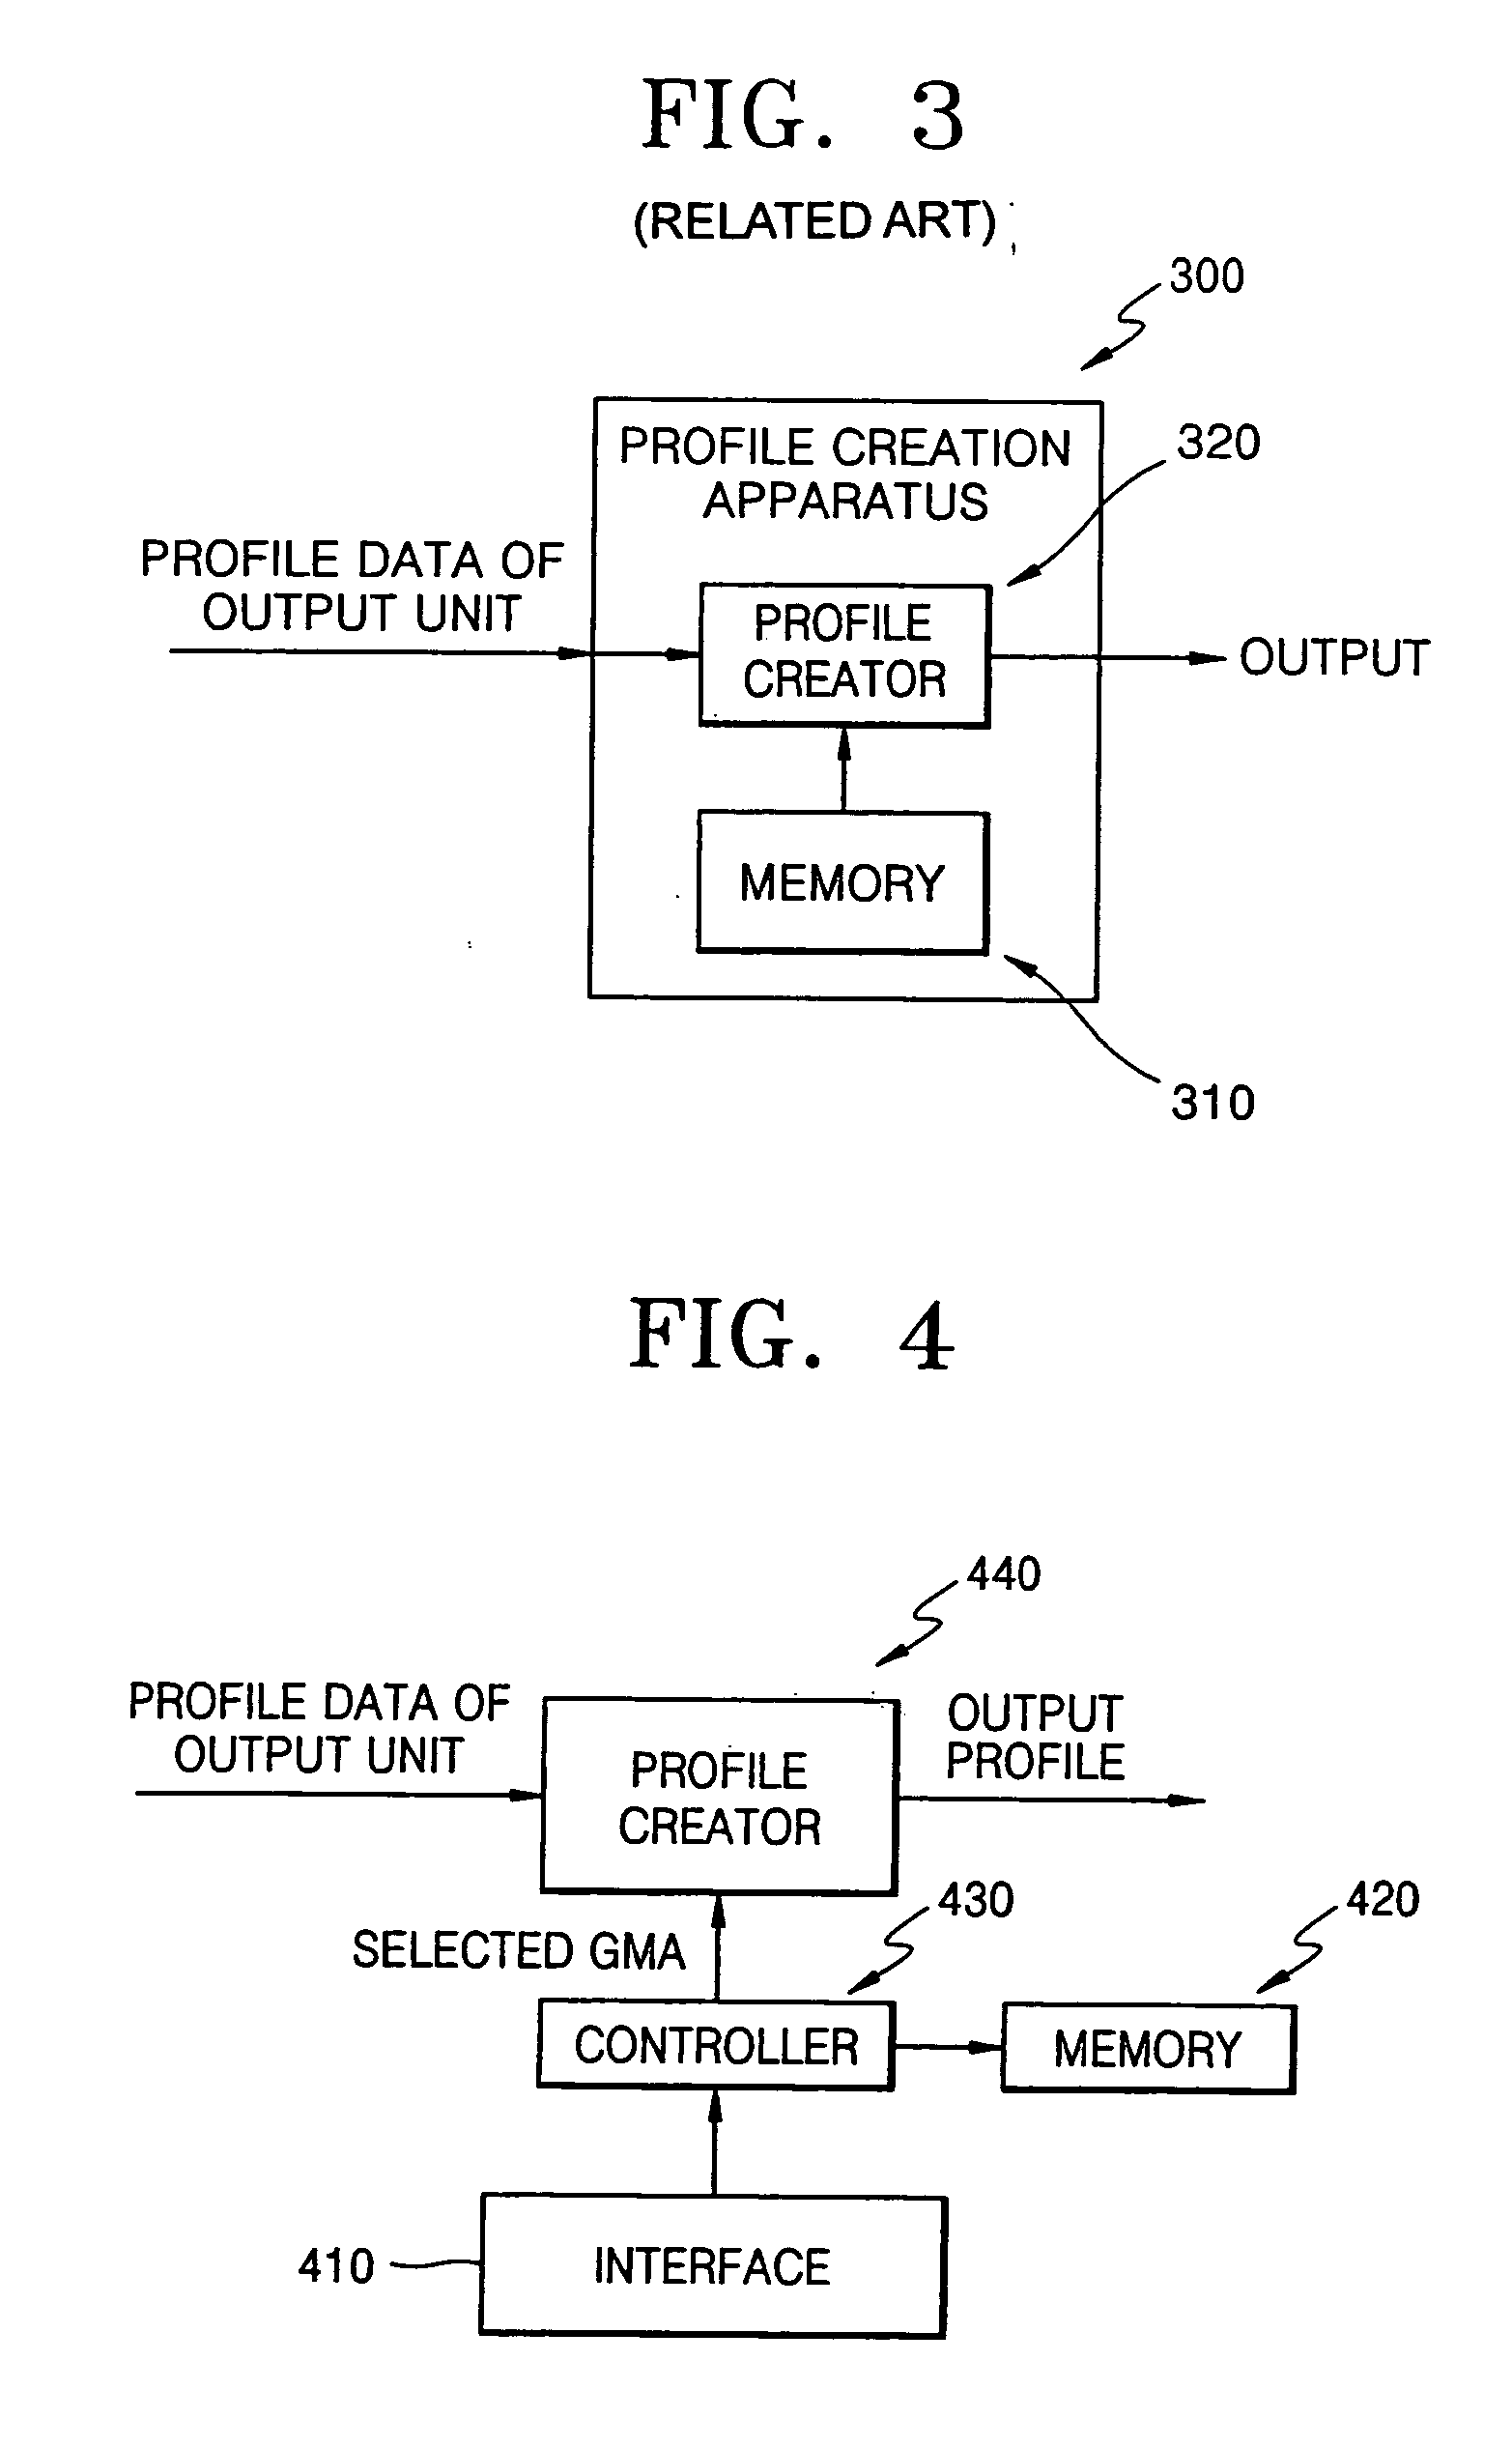 Method and apparatus for creating profile